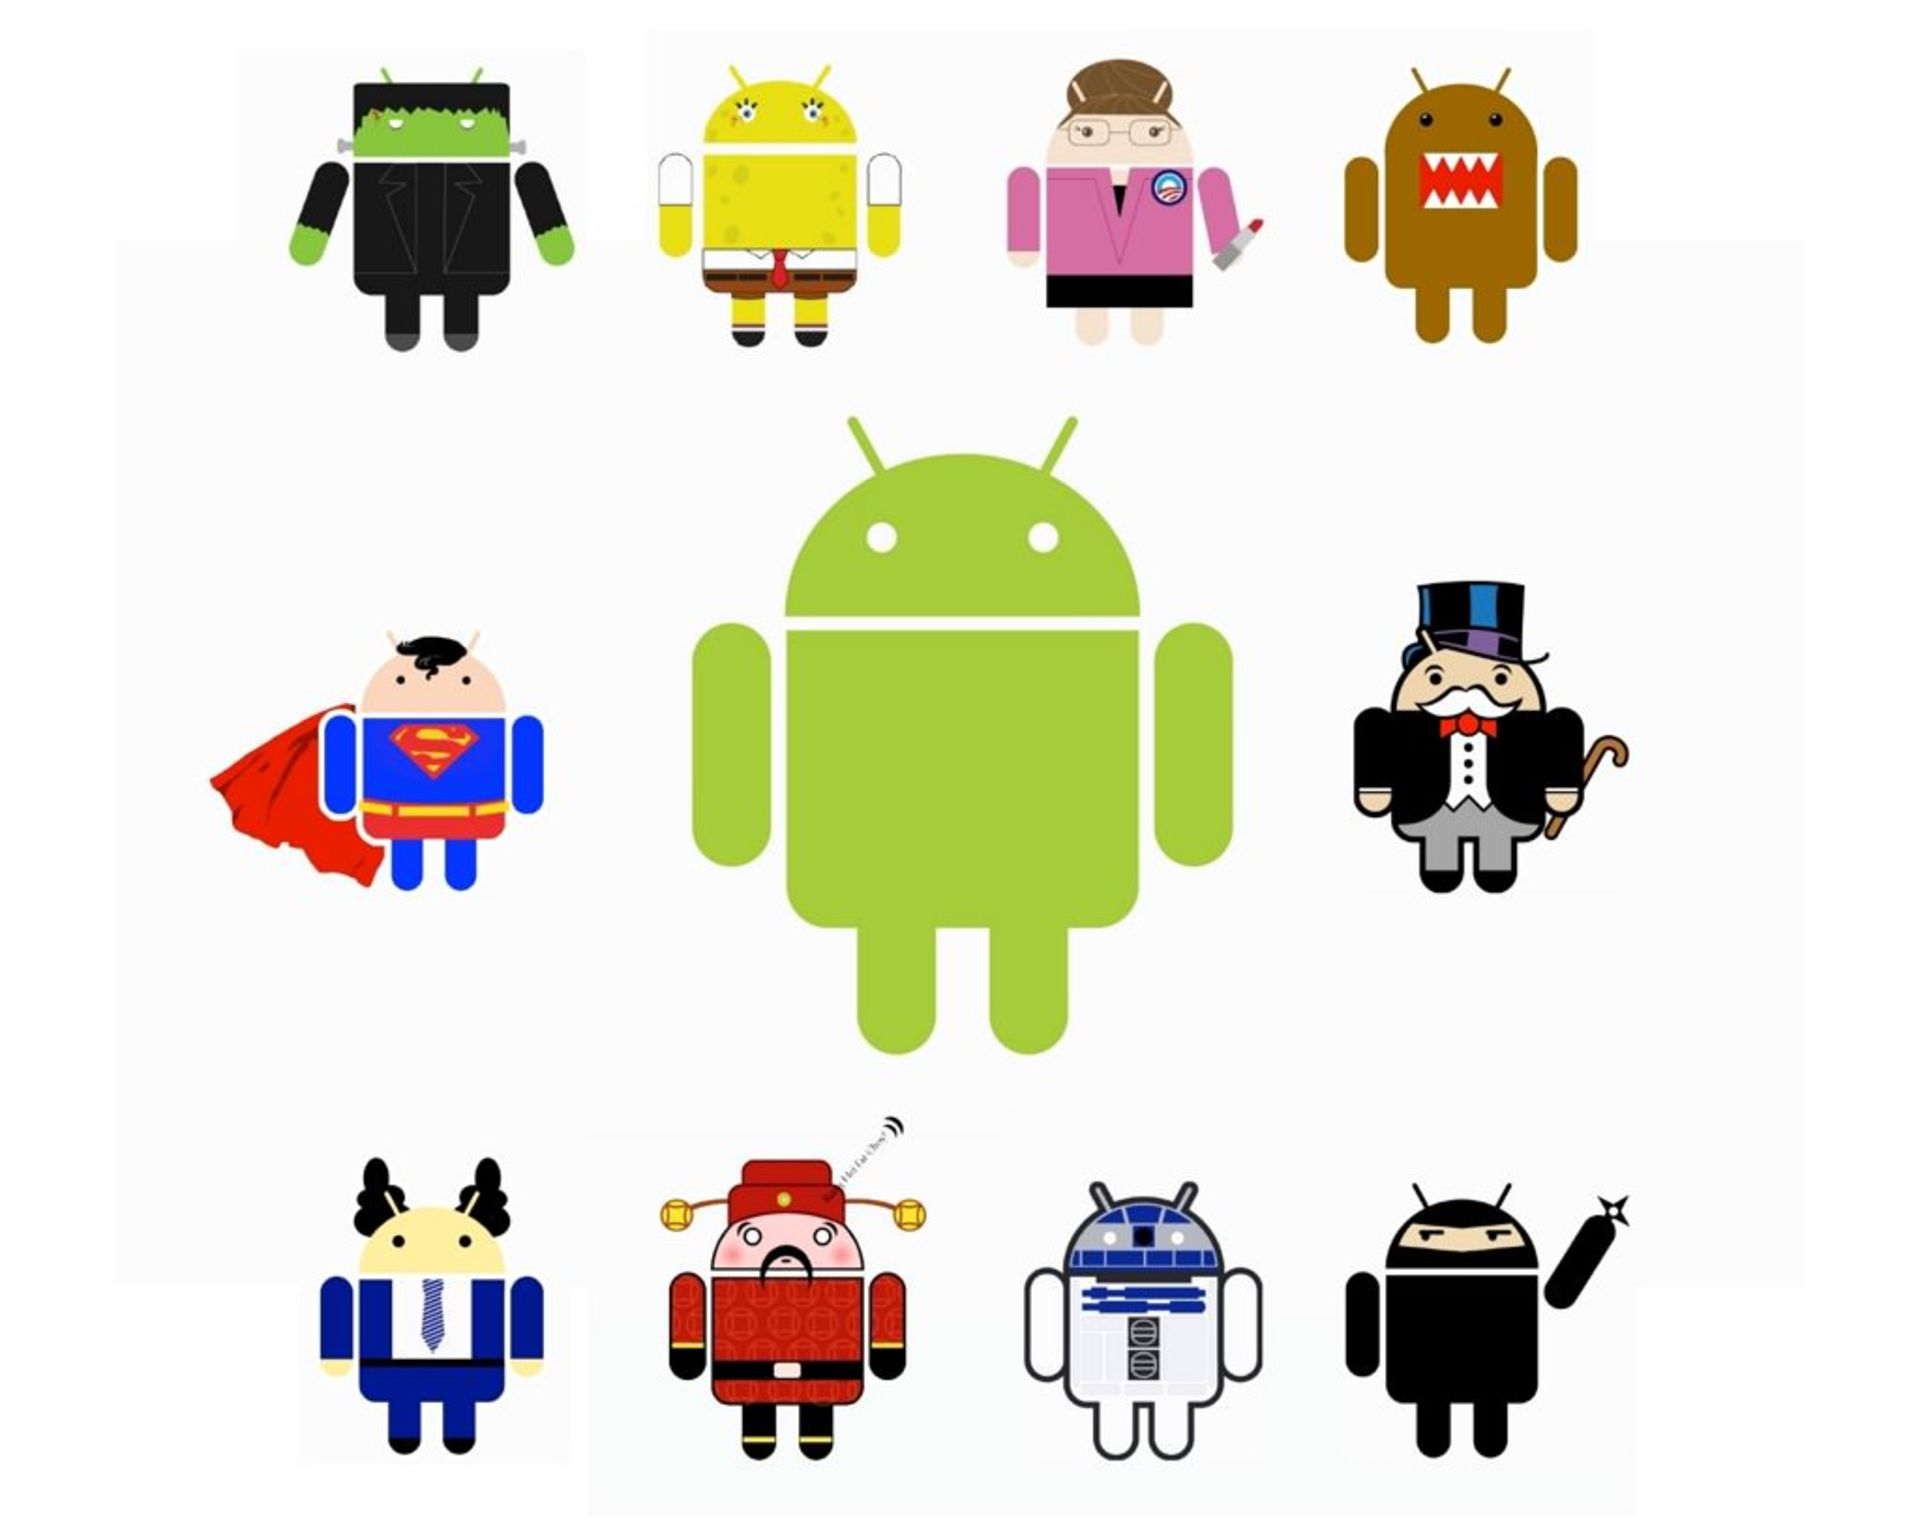 The-story-of-the-Android-robot-logo Copy